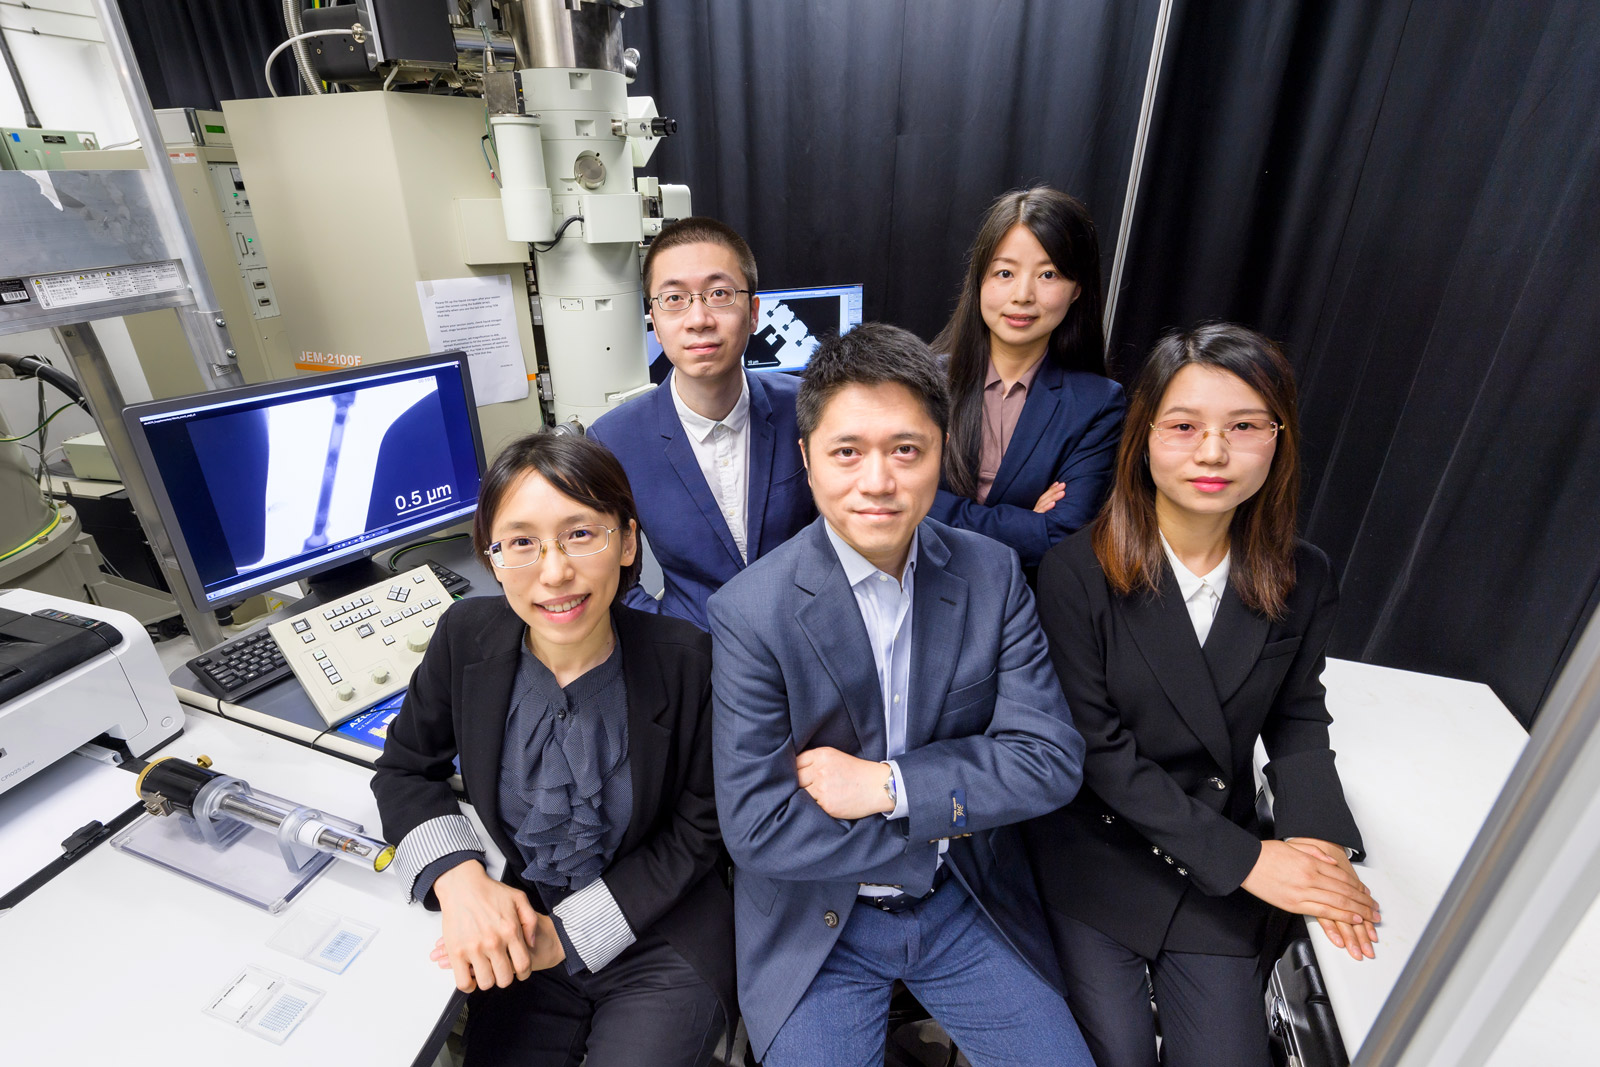 Dr Lu Yang (centre, front) and his research team: Dr Alice Hu (left, front); Dang Chaoqun (right, front); Lin Weitong (left, back) and Dr Fan Rong (right, back).